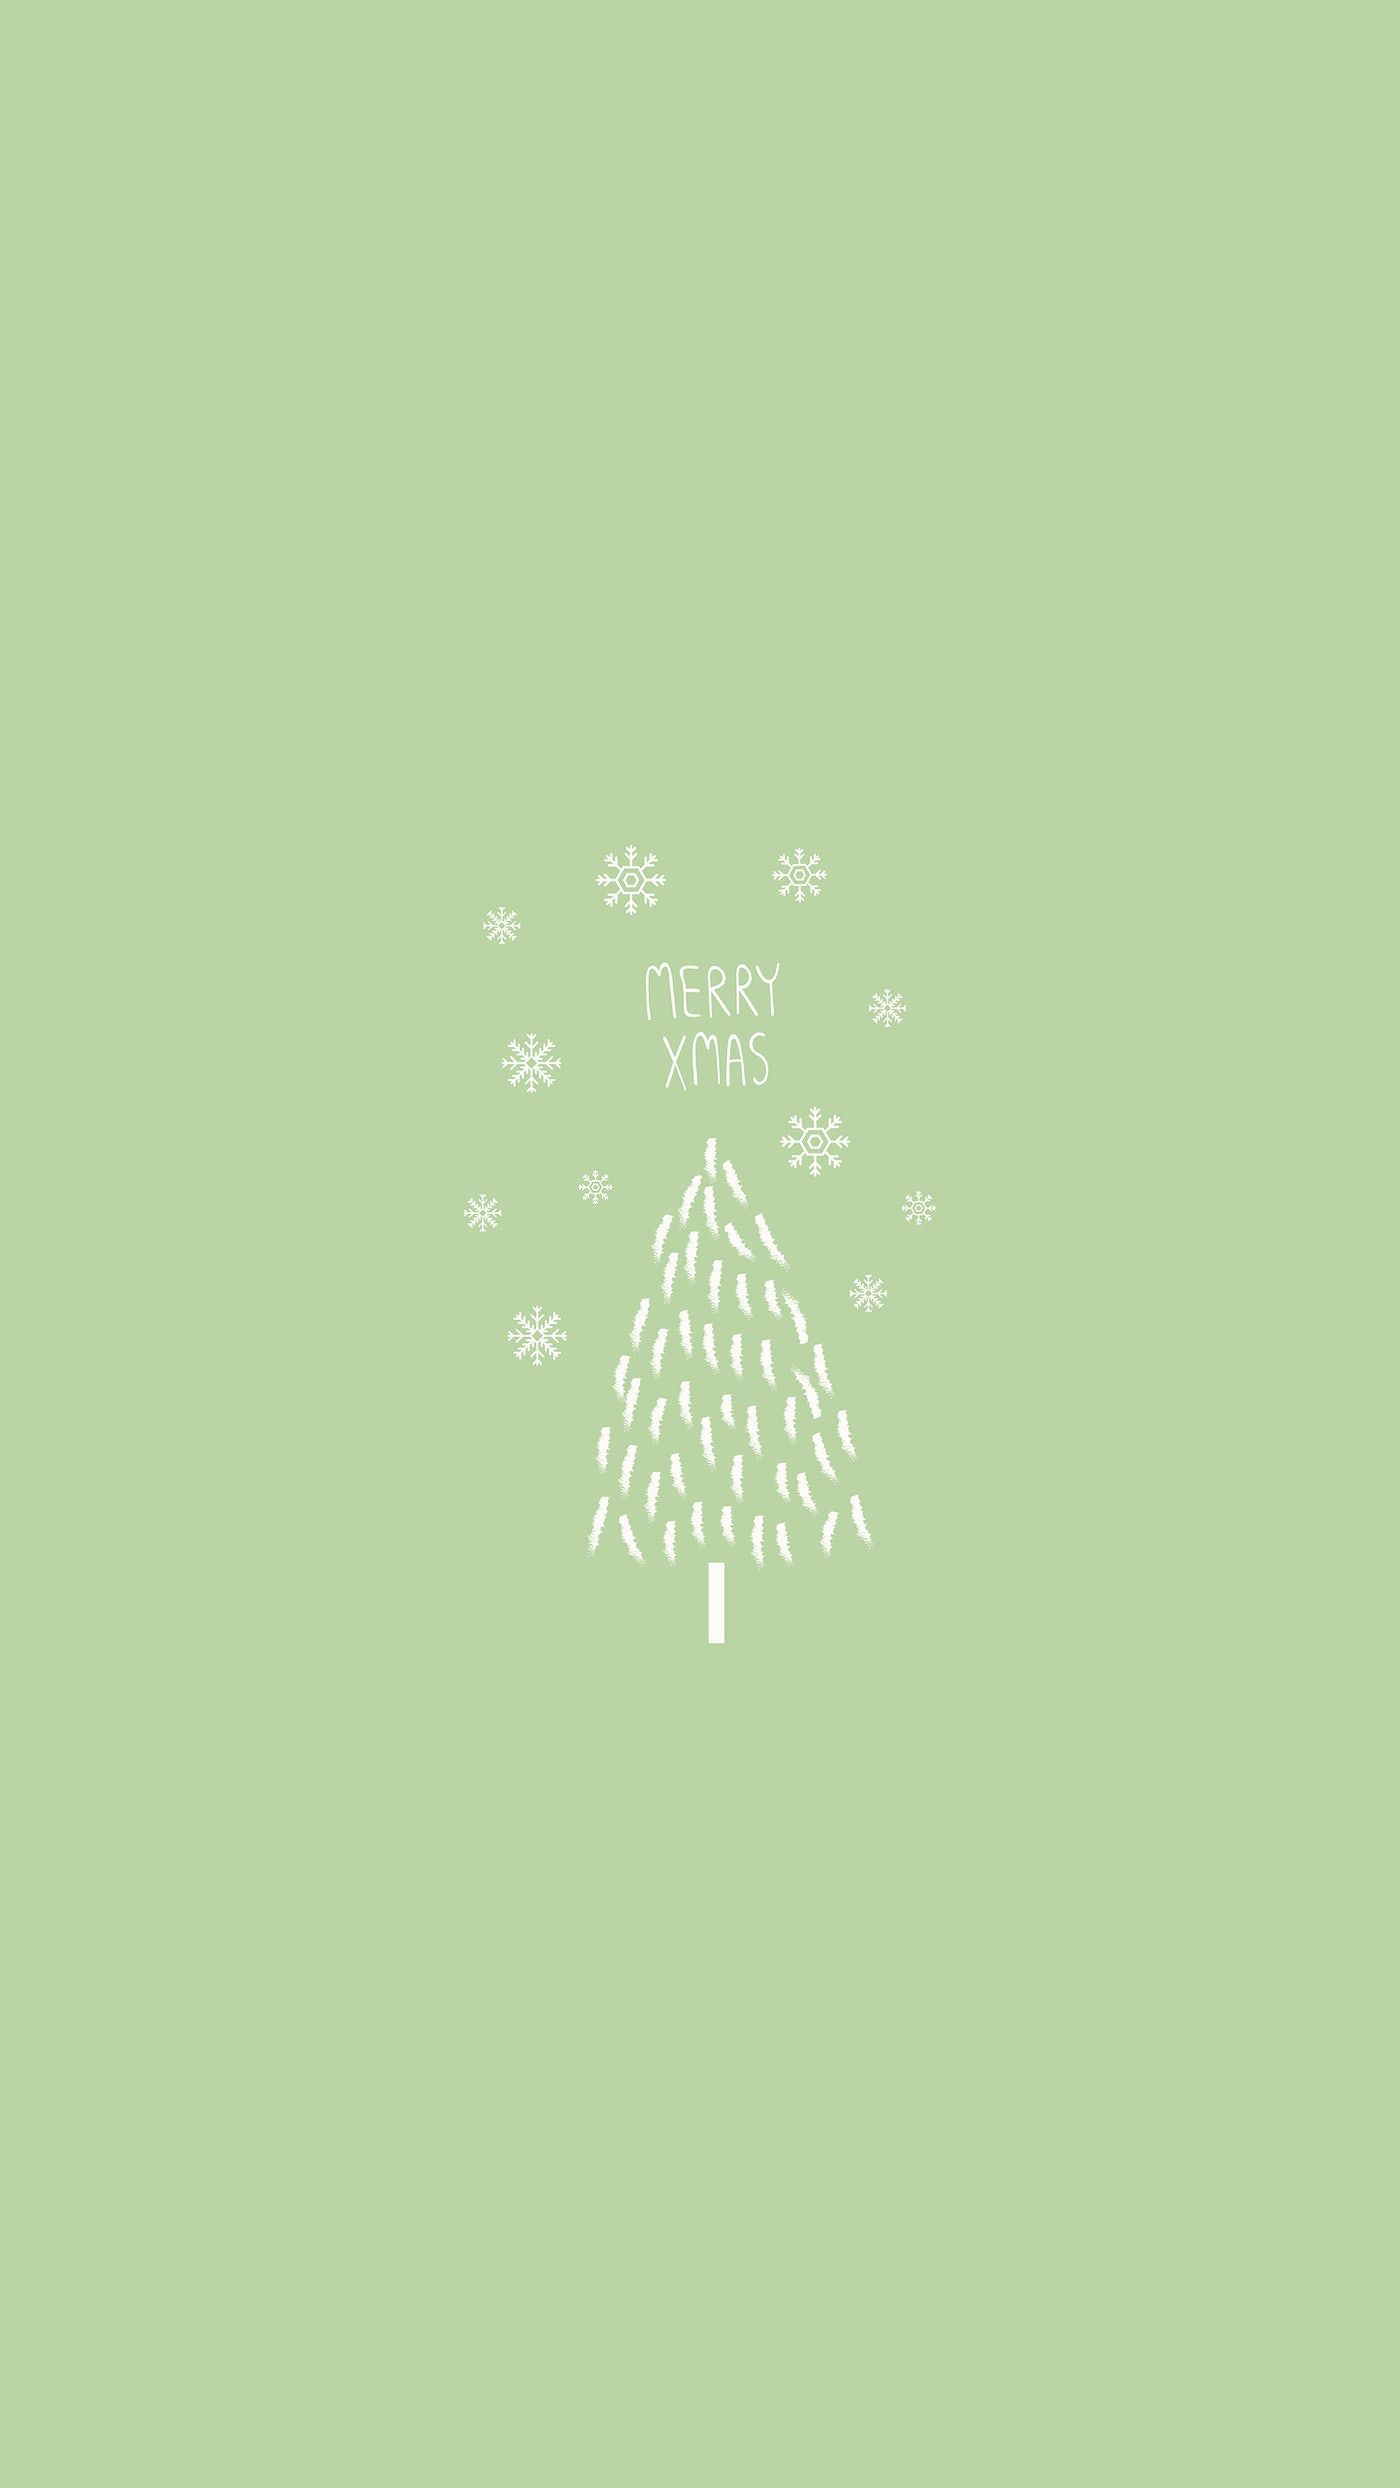 Christmas decorated phone background. Royalty free vector